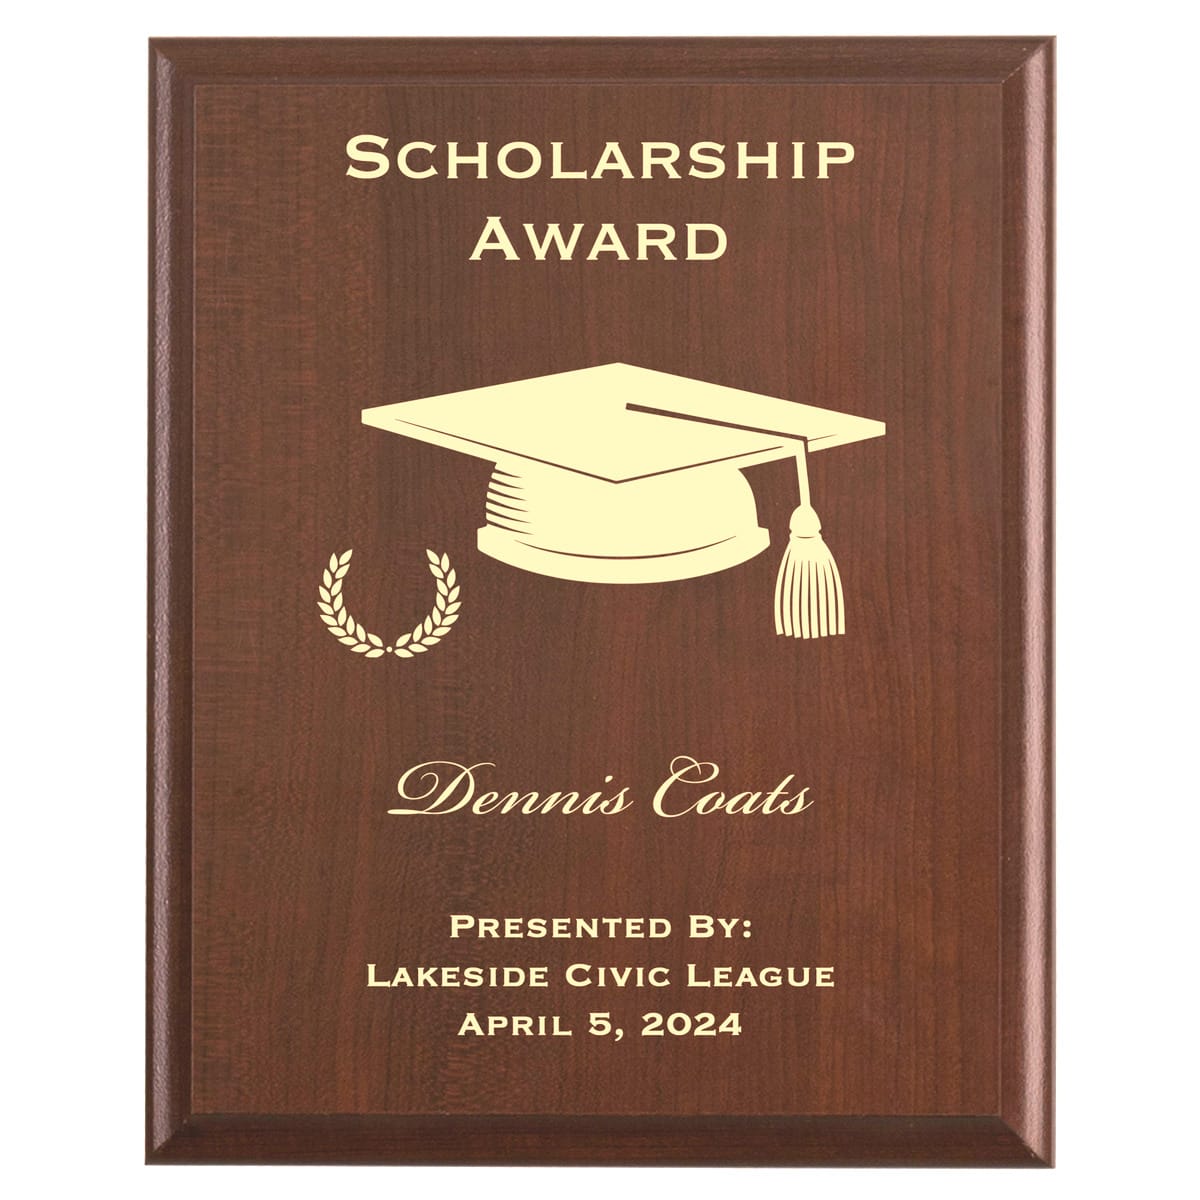 Plaque photo: Scholarship Award Plaque design with free personalization. Wood style finish with customized text.